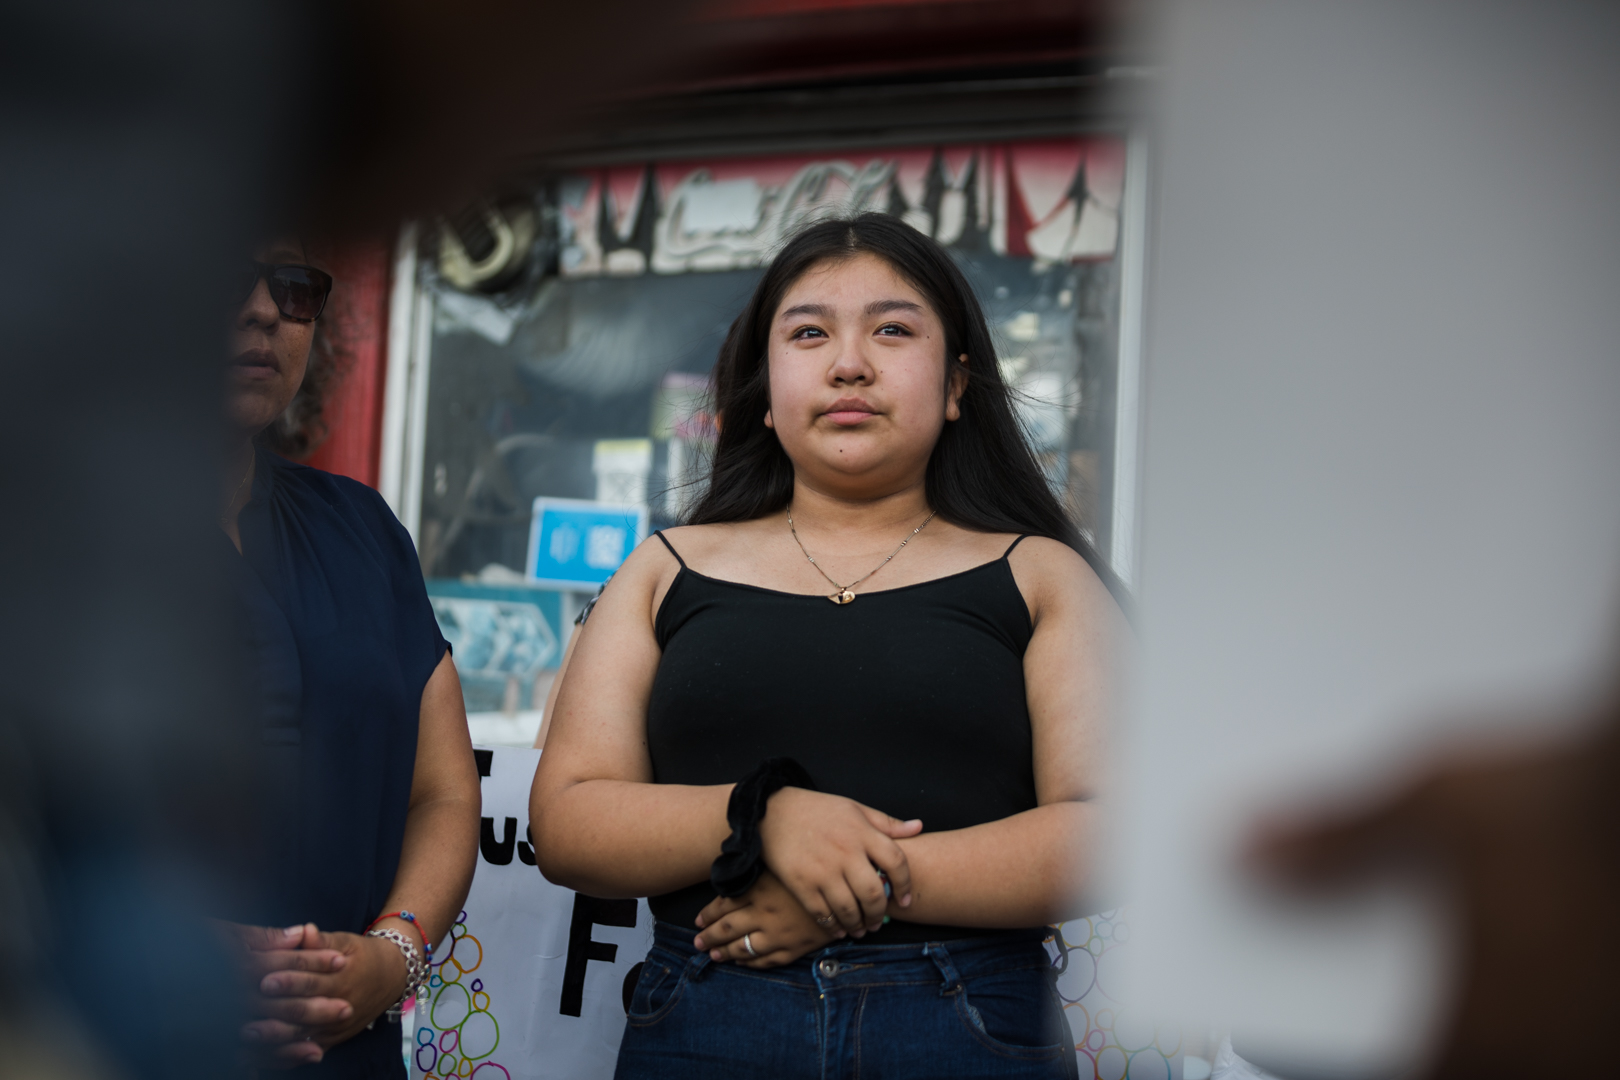 Ana Karen Porras, 13, at a memorial for her mother María del Carmen Porras Hernández, who was fatally struck by a car on July 8. Eagle photo by Paul Frangipane